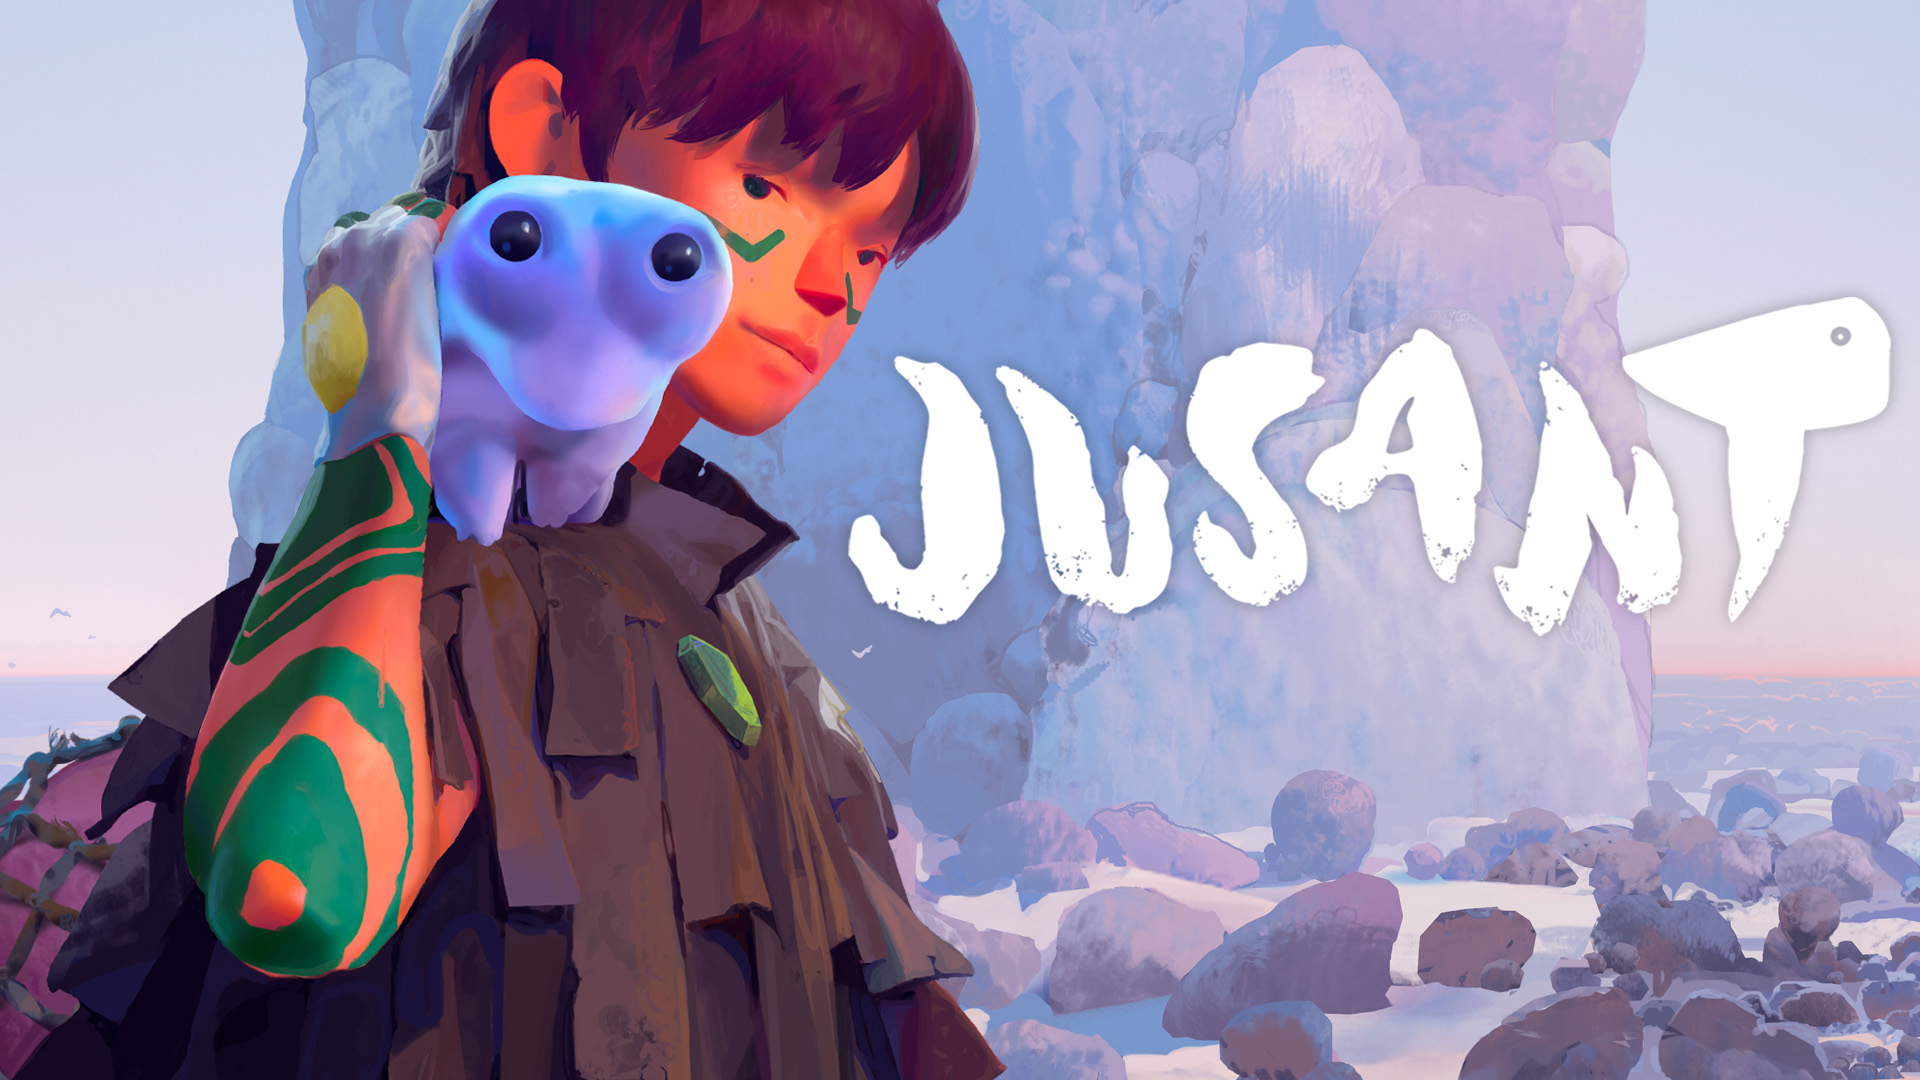 Jusant is out now!